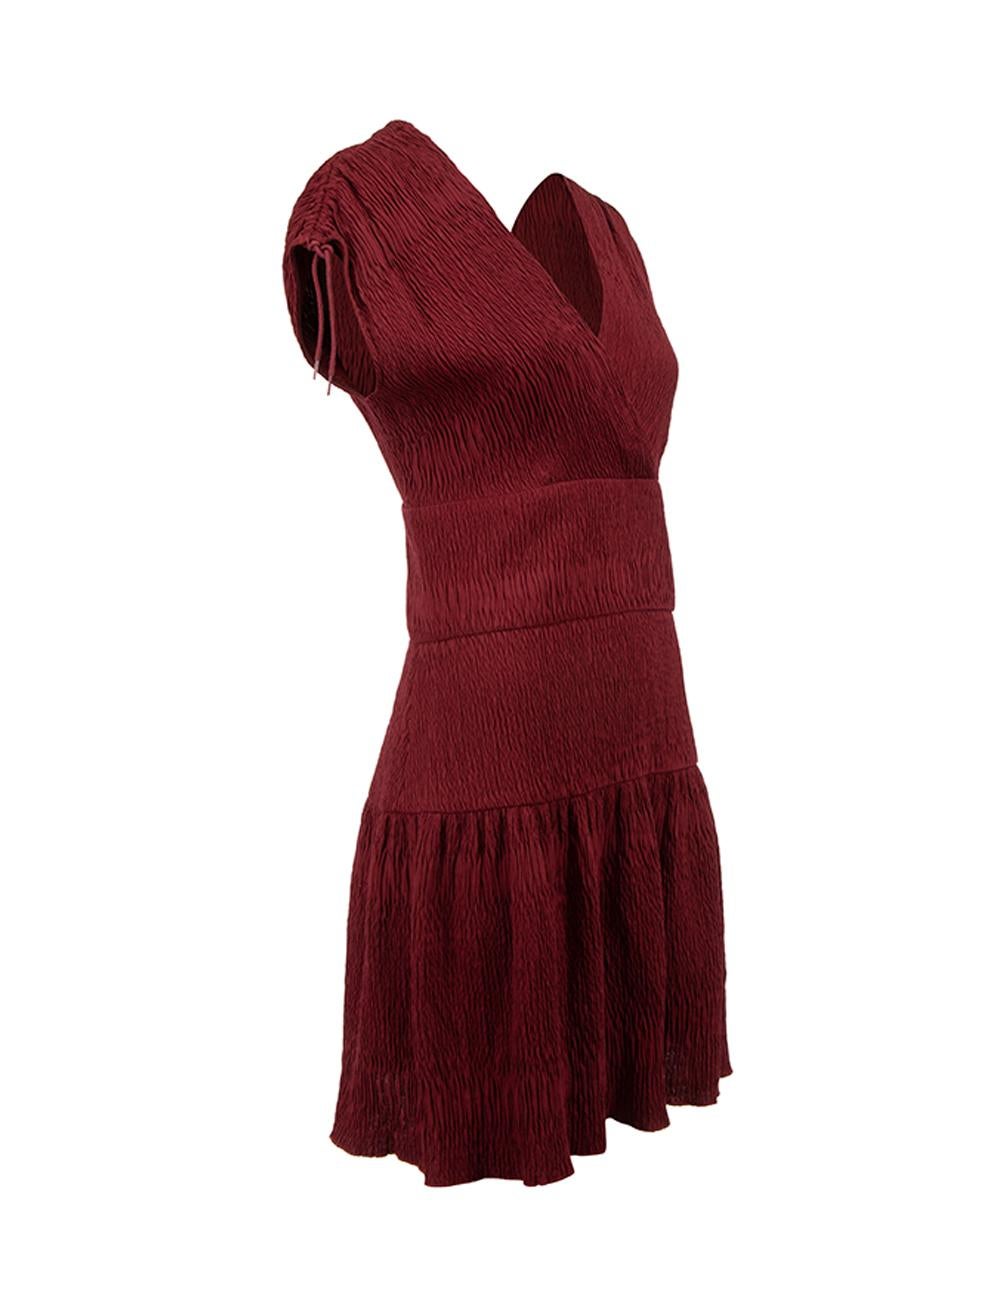 CONDITION is Very good. Hardly any visible wear to dress is evident on this used Maje designer resale item.




Details


Burgundy

Viscose

Mini dress

Textured

V neckline

Drawstring on shoulder

Back zip closure





Made in